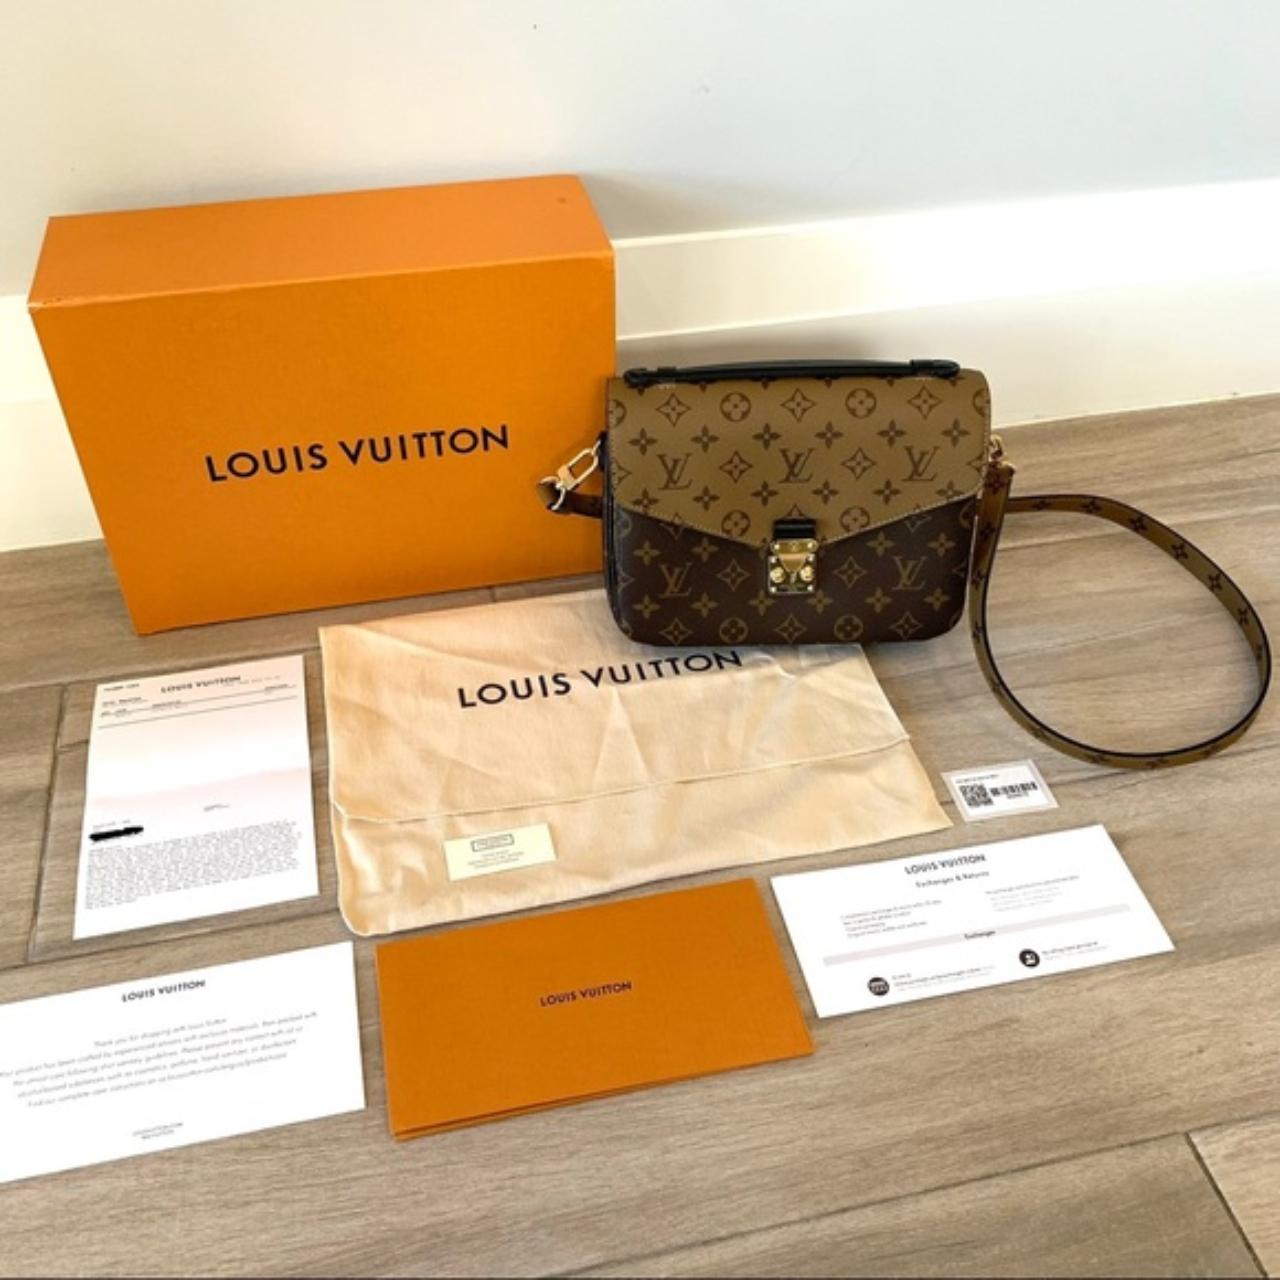 New in box guaranteed authentic LOUIS VUITTON - Depop